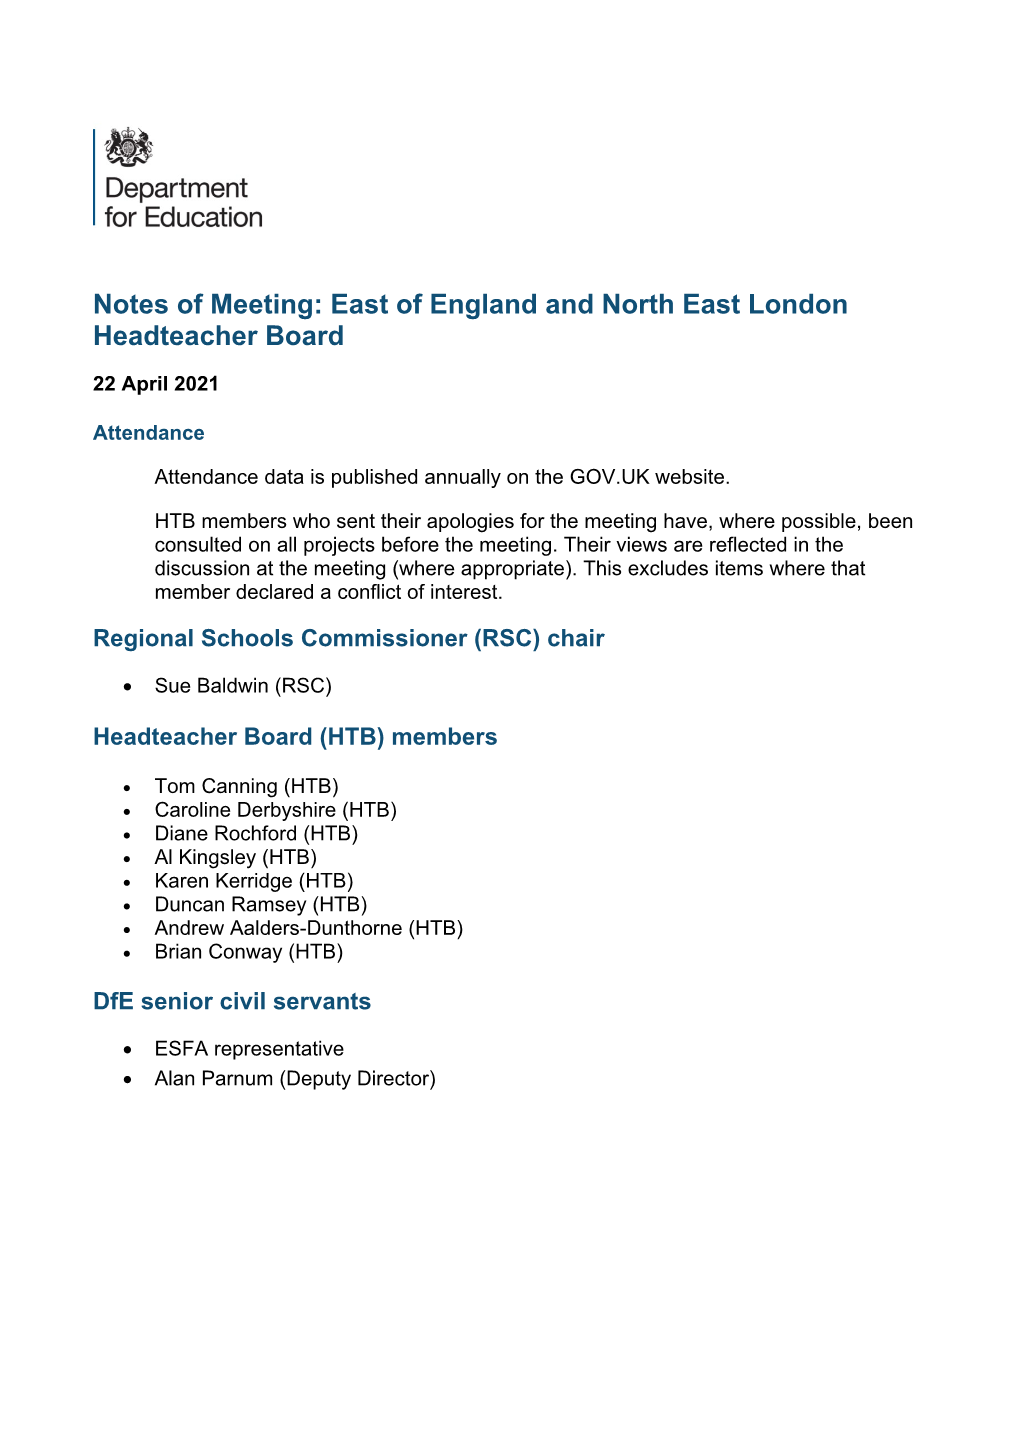 Notes of Meeting: East of England and North East London Headteacher Board